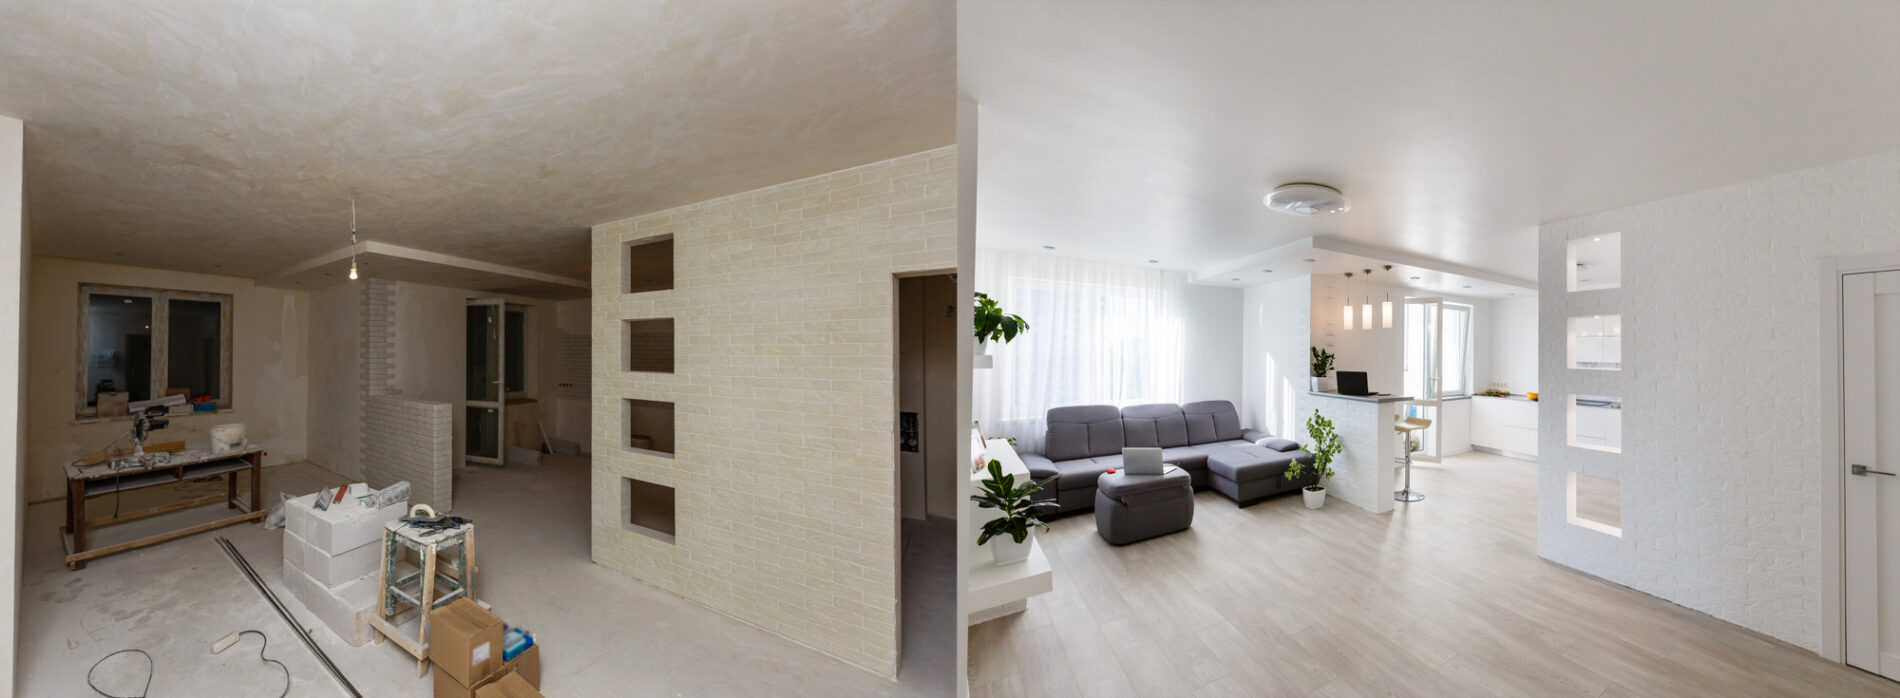 Renovation before and after – empty apartment room, new and old,